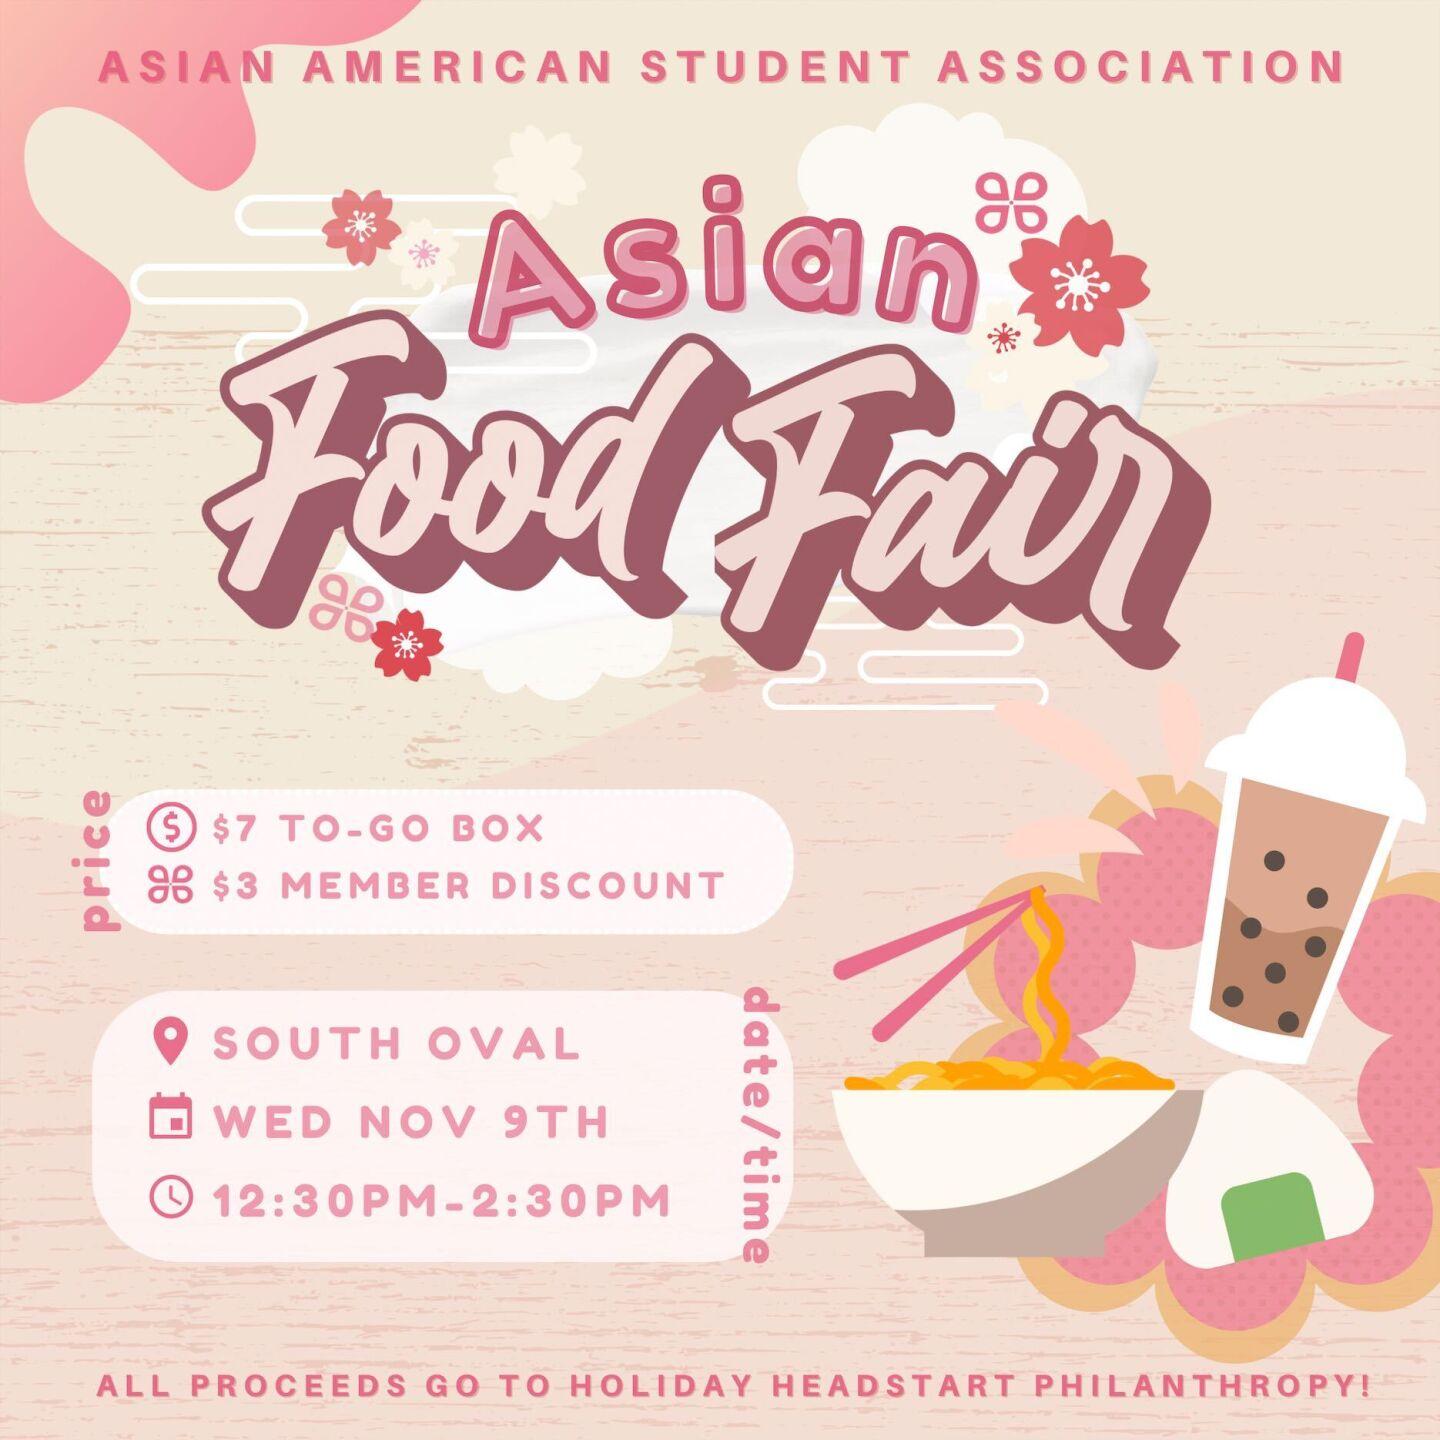 Asian American Student Association to host Asian Food Fair to raise